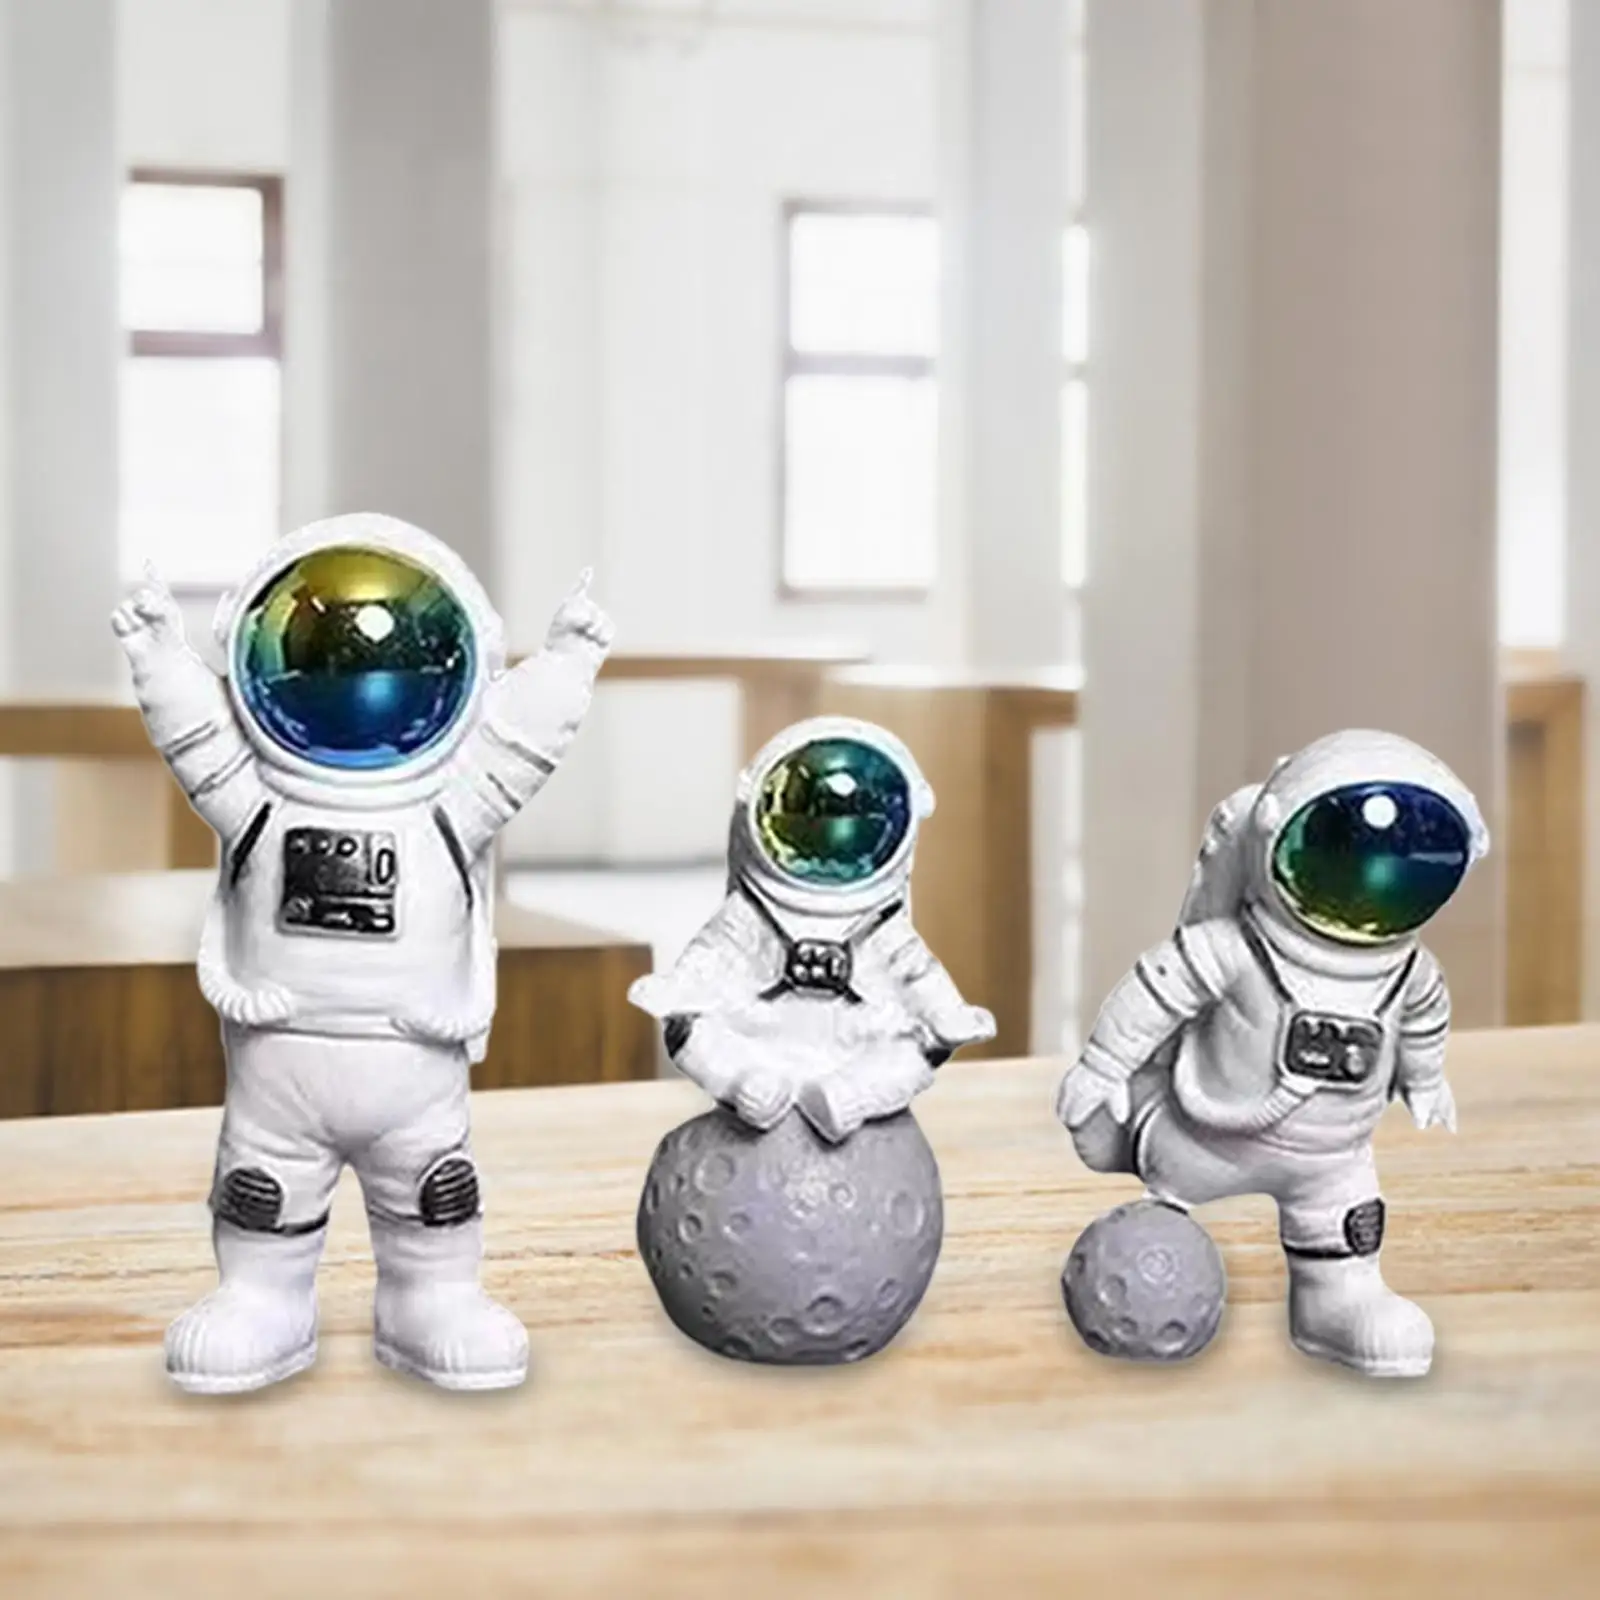 Astronaut Figurine, Blue Astronaut Figure Toy Desktop Ornaments Resin Outer Space Birthday Cupcake Spaceman for Kids Party Gift